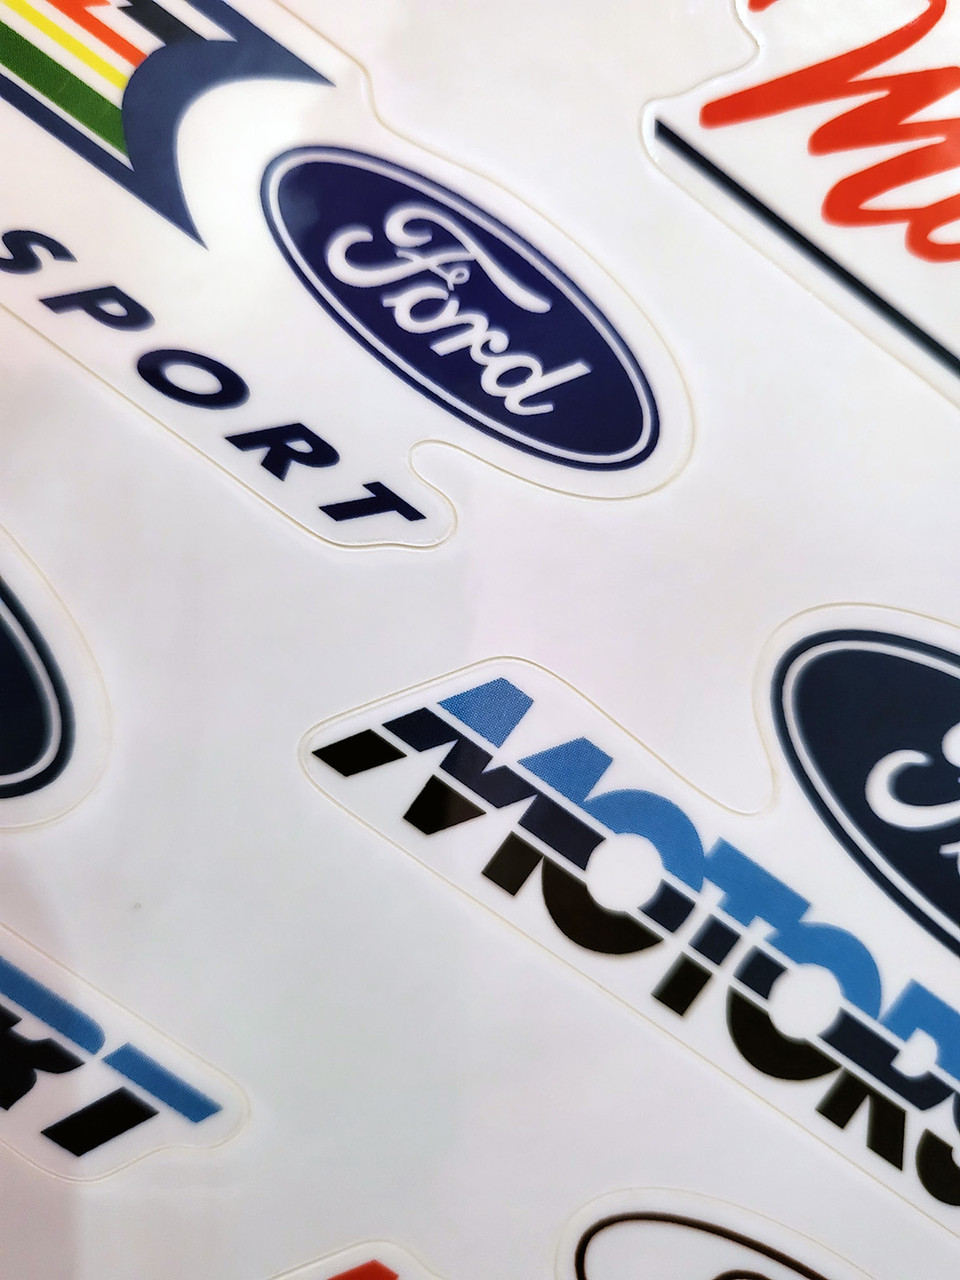 ford racing decals